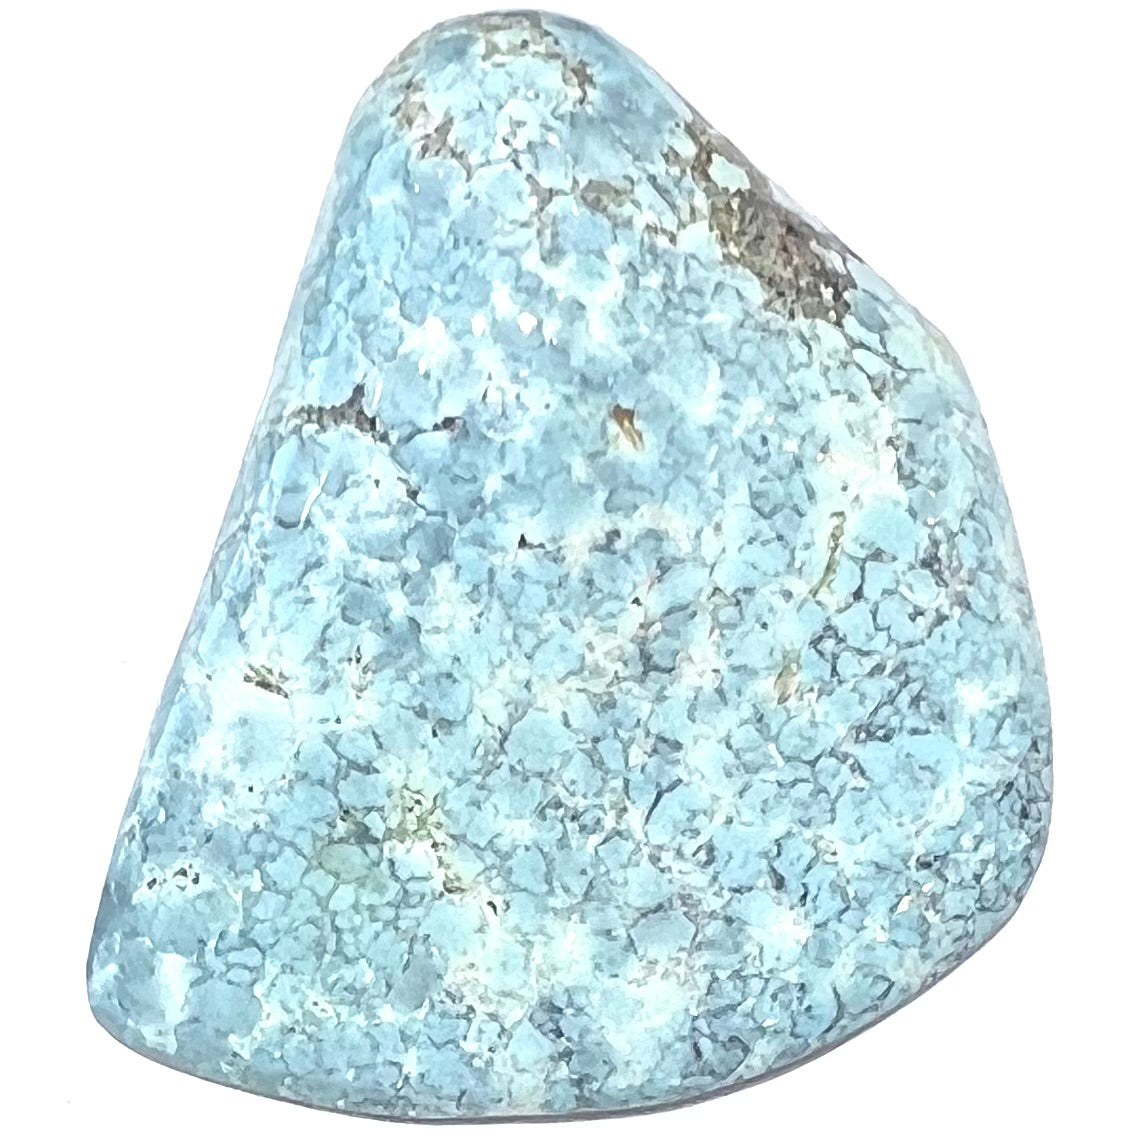 Loose light blue turquoise stone with gray matrix from Baja California, Mexico.